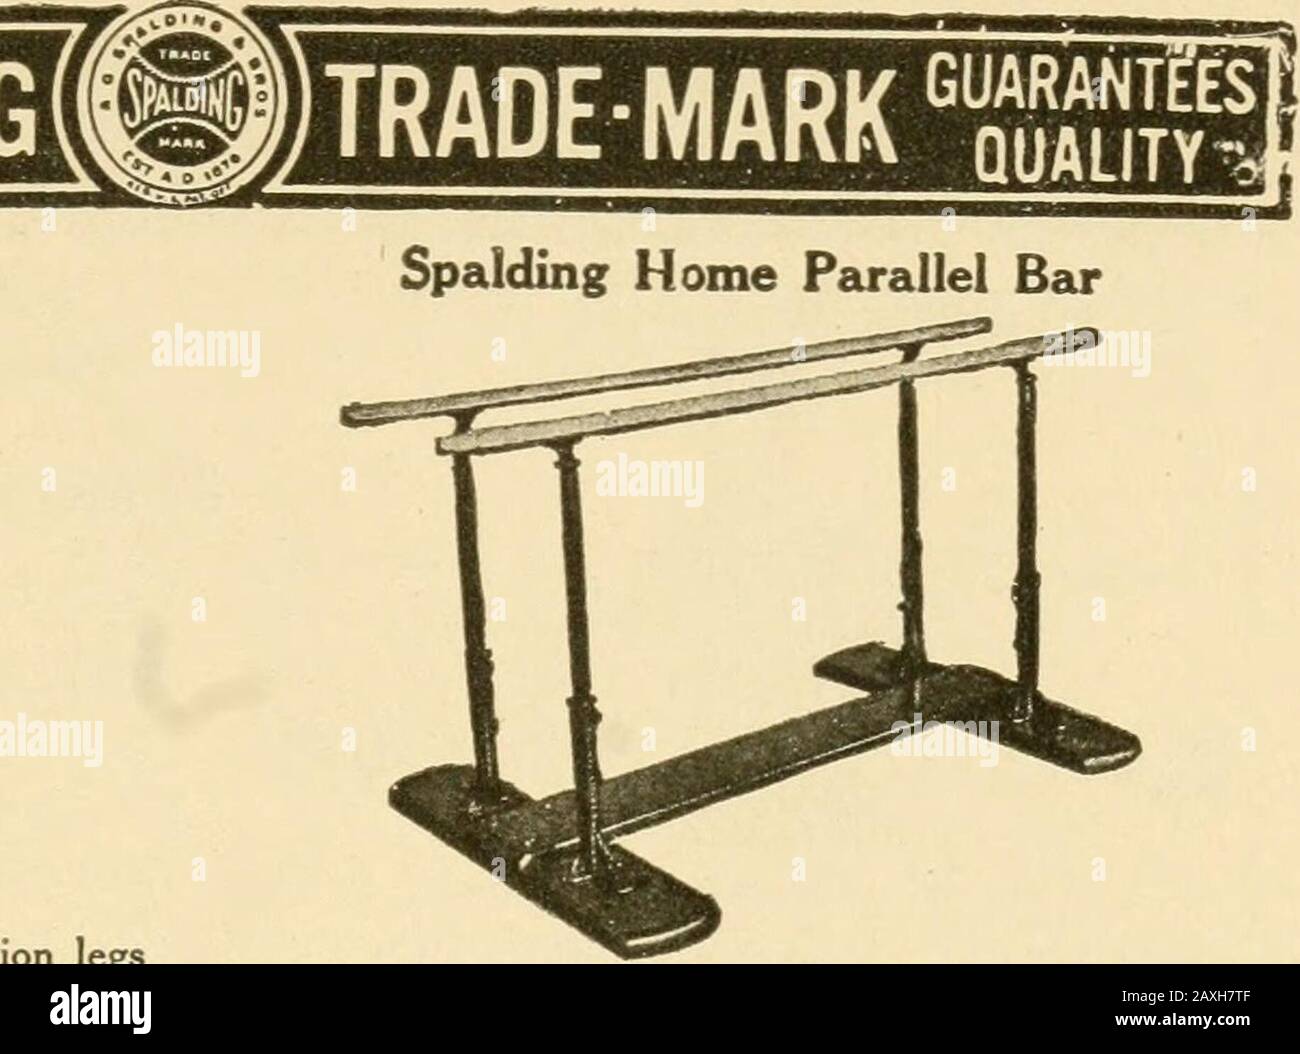 Graded calisthenic and dumb bell drills . No. 1. Four legs, telescoping, the inside or extension legsbeing made of hard wood, with iron hoofs. Body coveredwith cowhide of the best quality. Closed pommels, easilydetachable . Complete, $60.00 Spalding Floor Horizonted Bars. No. 101. This is an excellent medium priced bar, madeadjustable in height and of good material throughout. Thebase is constructed of hard wood, the uprights are iron andfree from any dangerous projections or comers. The handrails are 8 feet long, regular, but may be furnished in anydesired length at additional cost. Floor spa Stock Photo